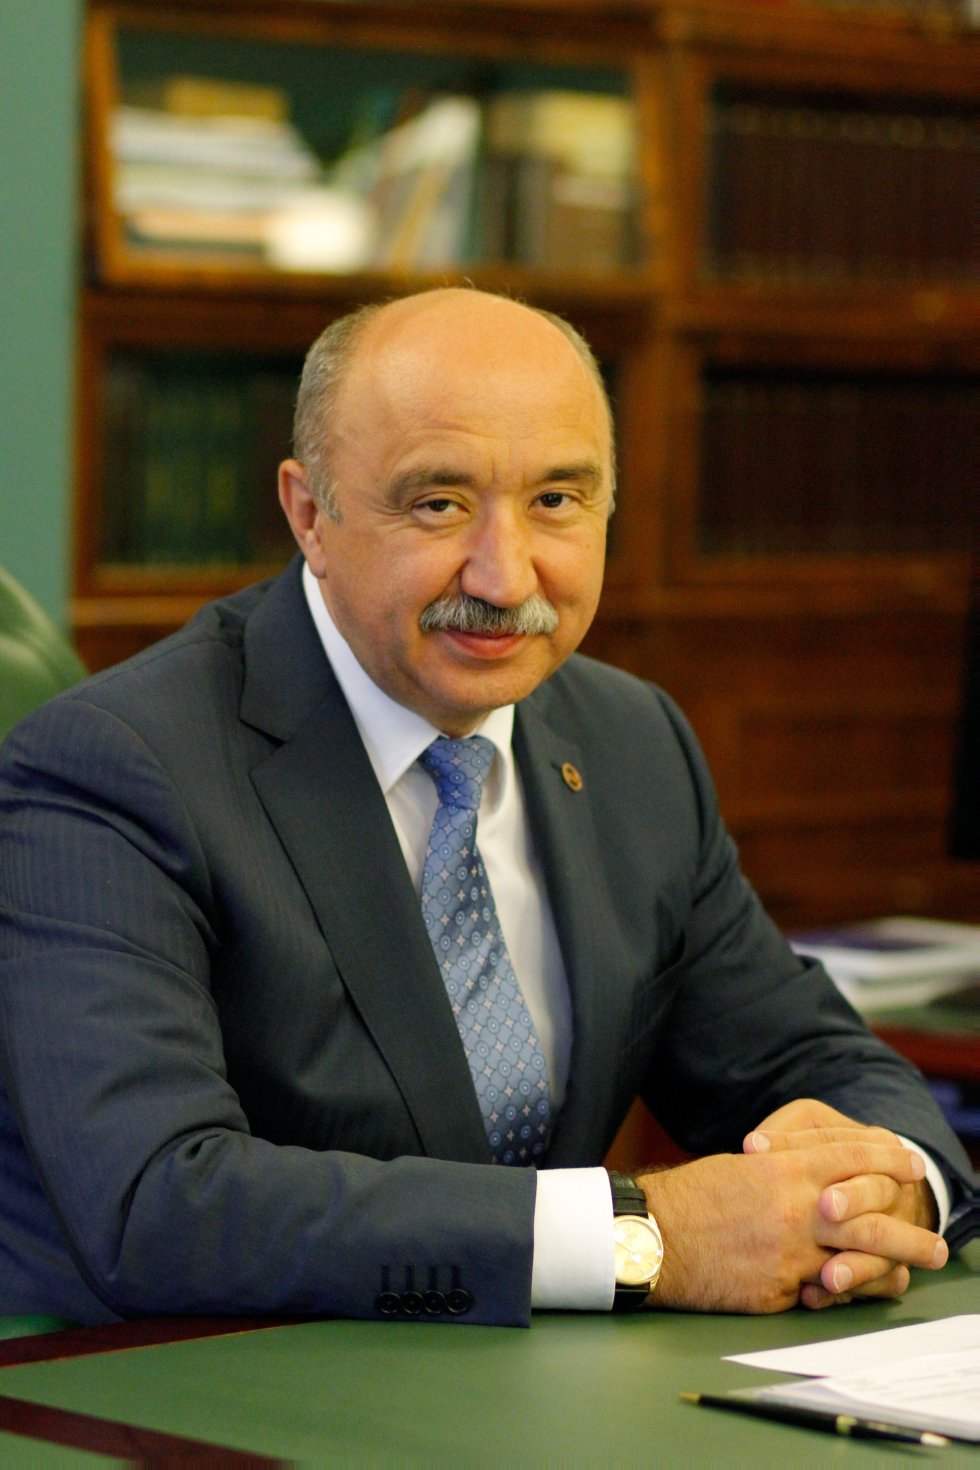 MESSAGE OF KAZAN FEDERAL UNIVERSITY RECTOR ILSHAT GAFUROV ON THE OCCASION OF THE TATARICA JOURNAL FIRST ISSUE PUBLICATION